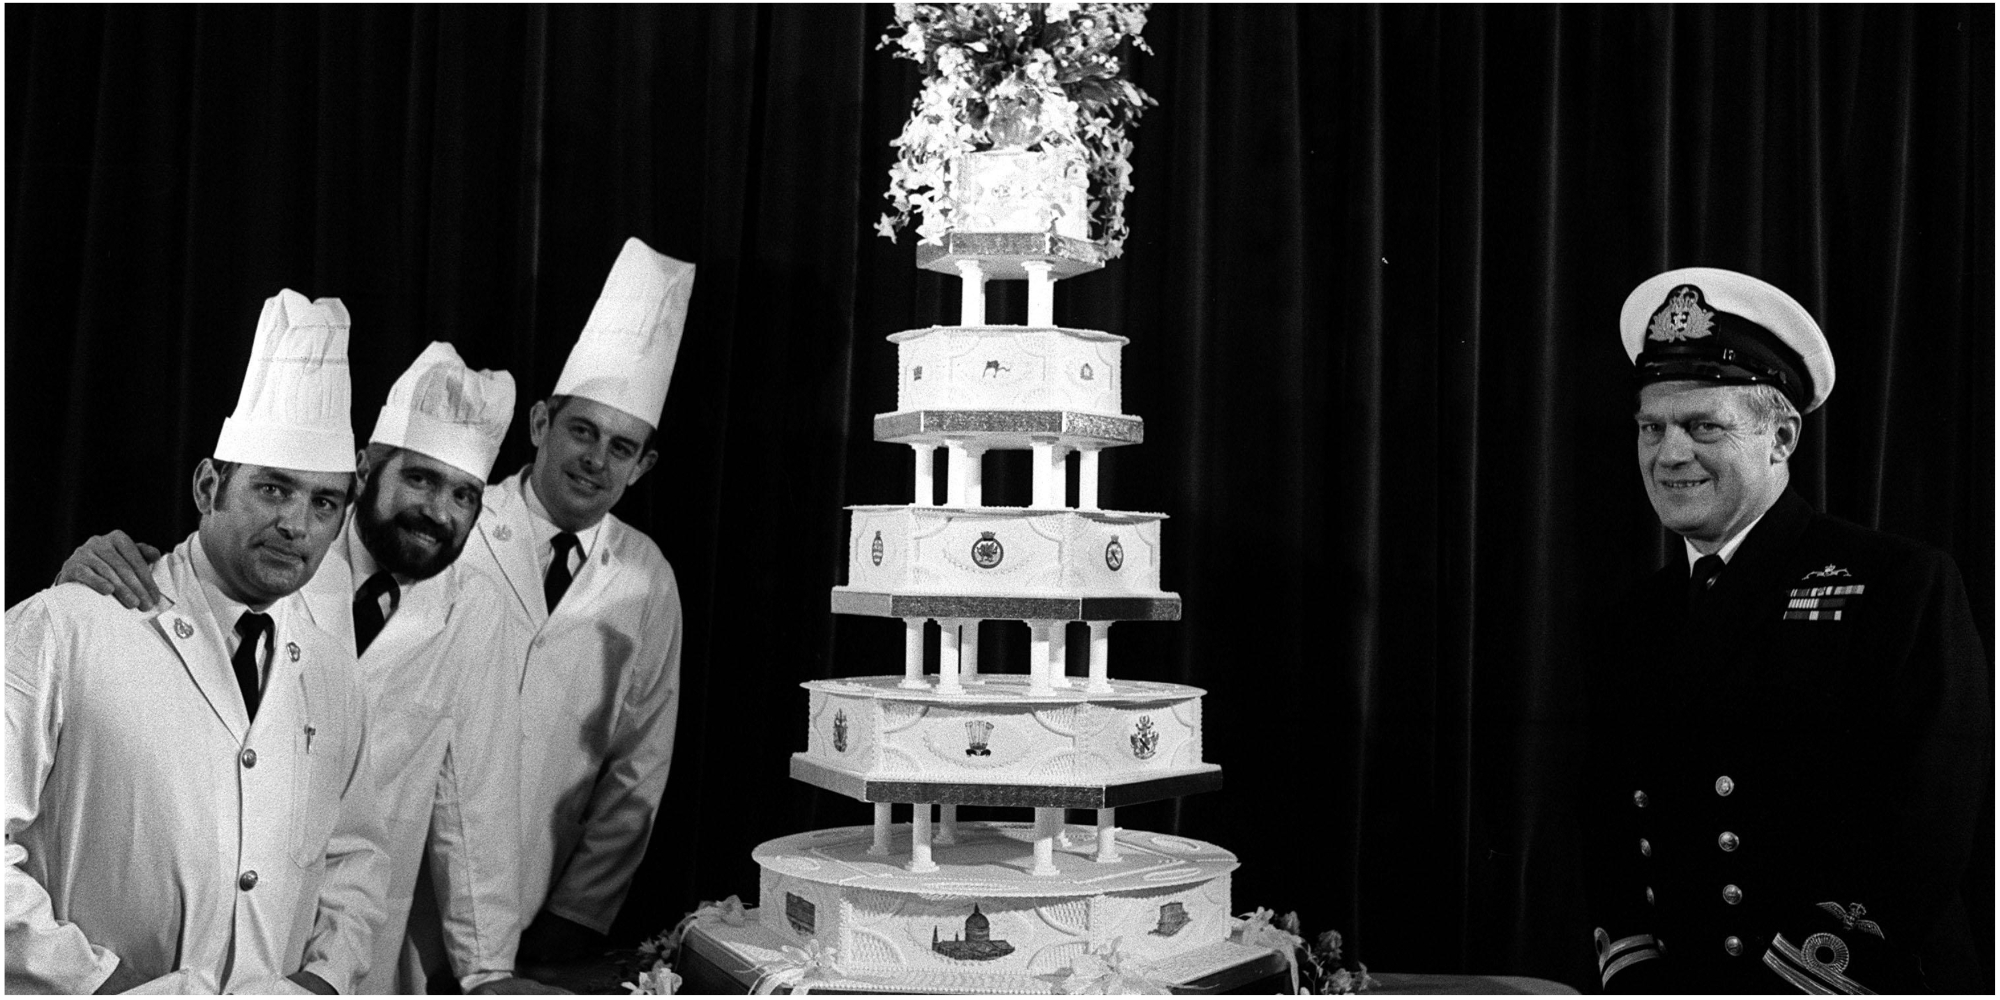 Princess Diana and Prince Charles' wedding cake was baked by members of the Royal Navy's cooking school.